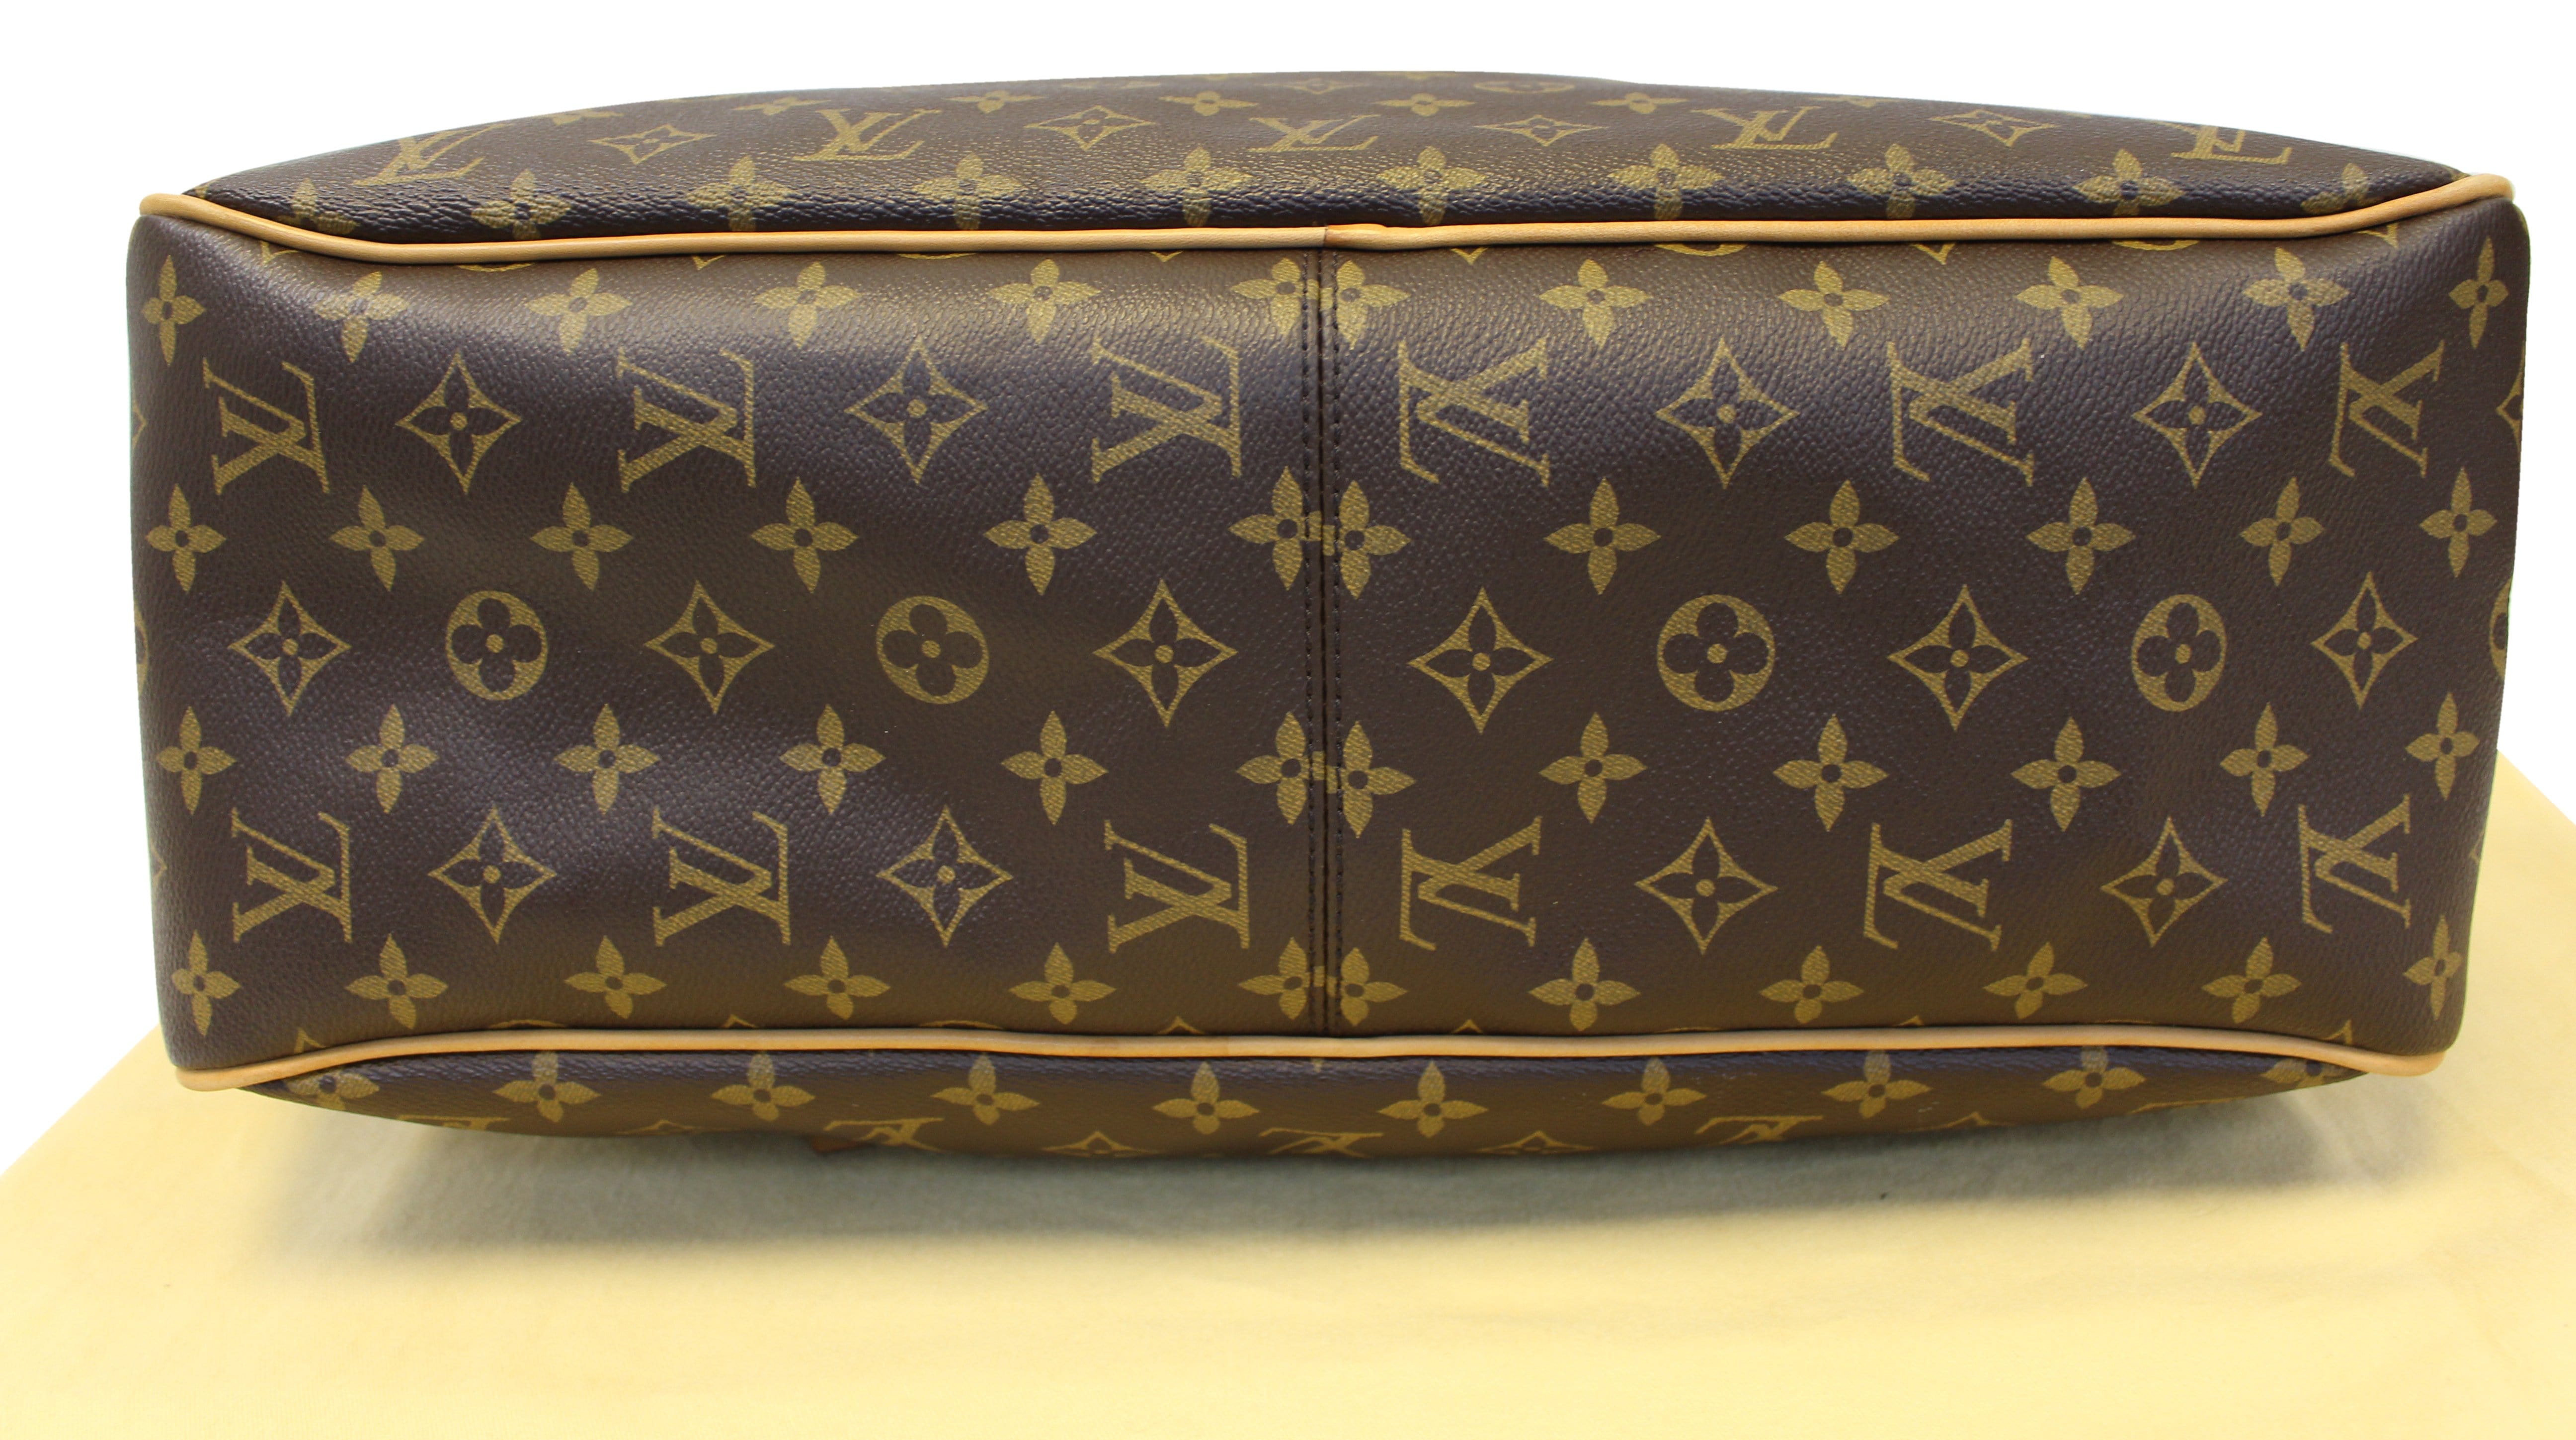 Is this a real LV e???